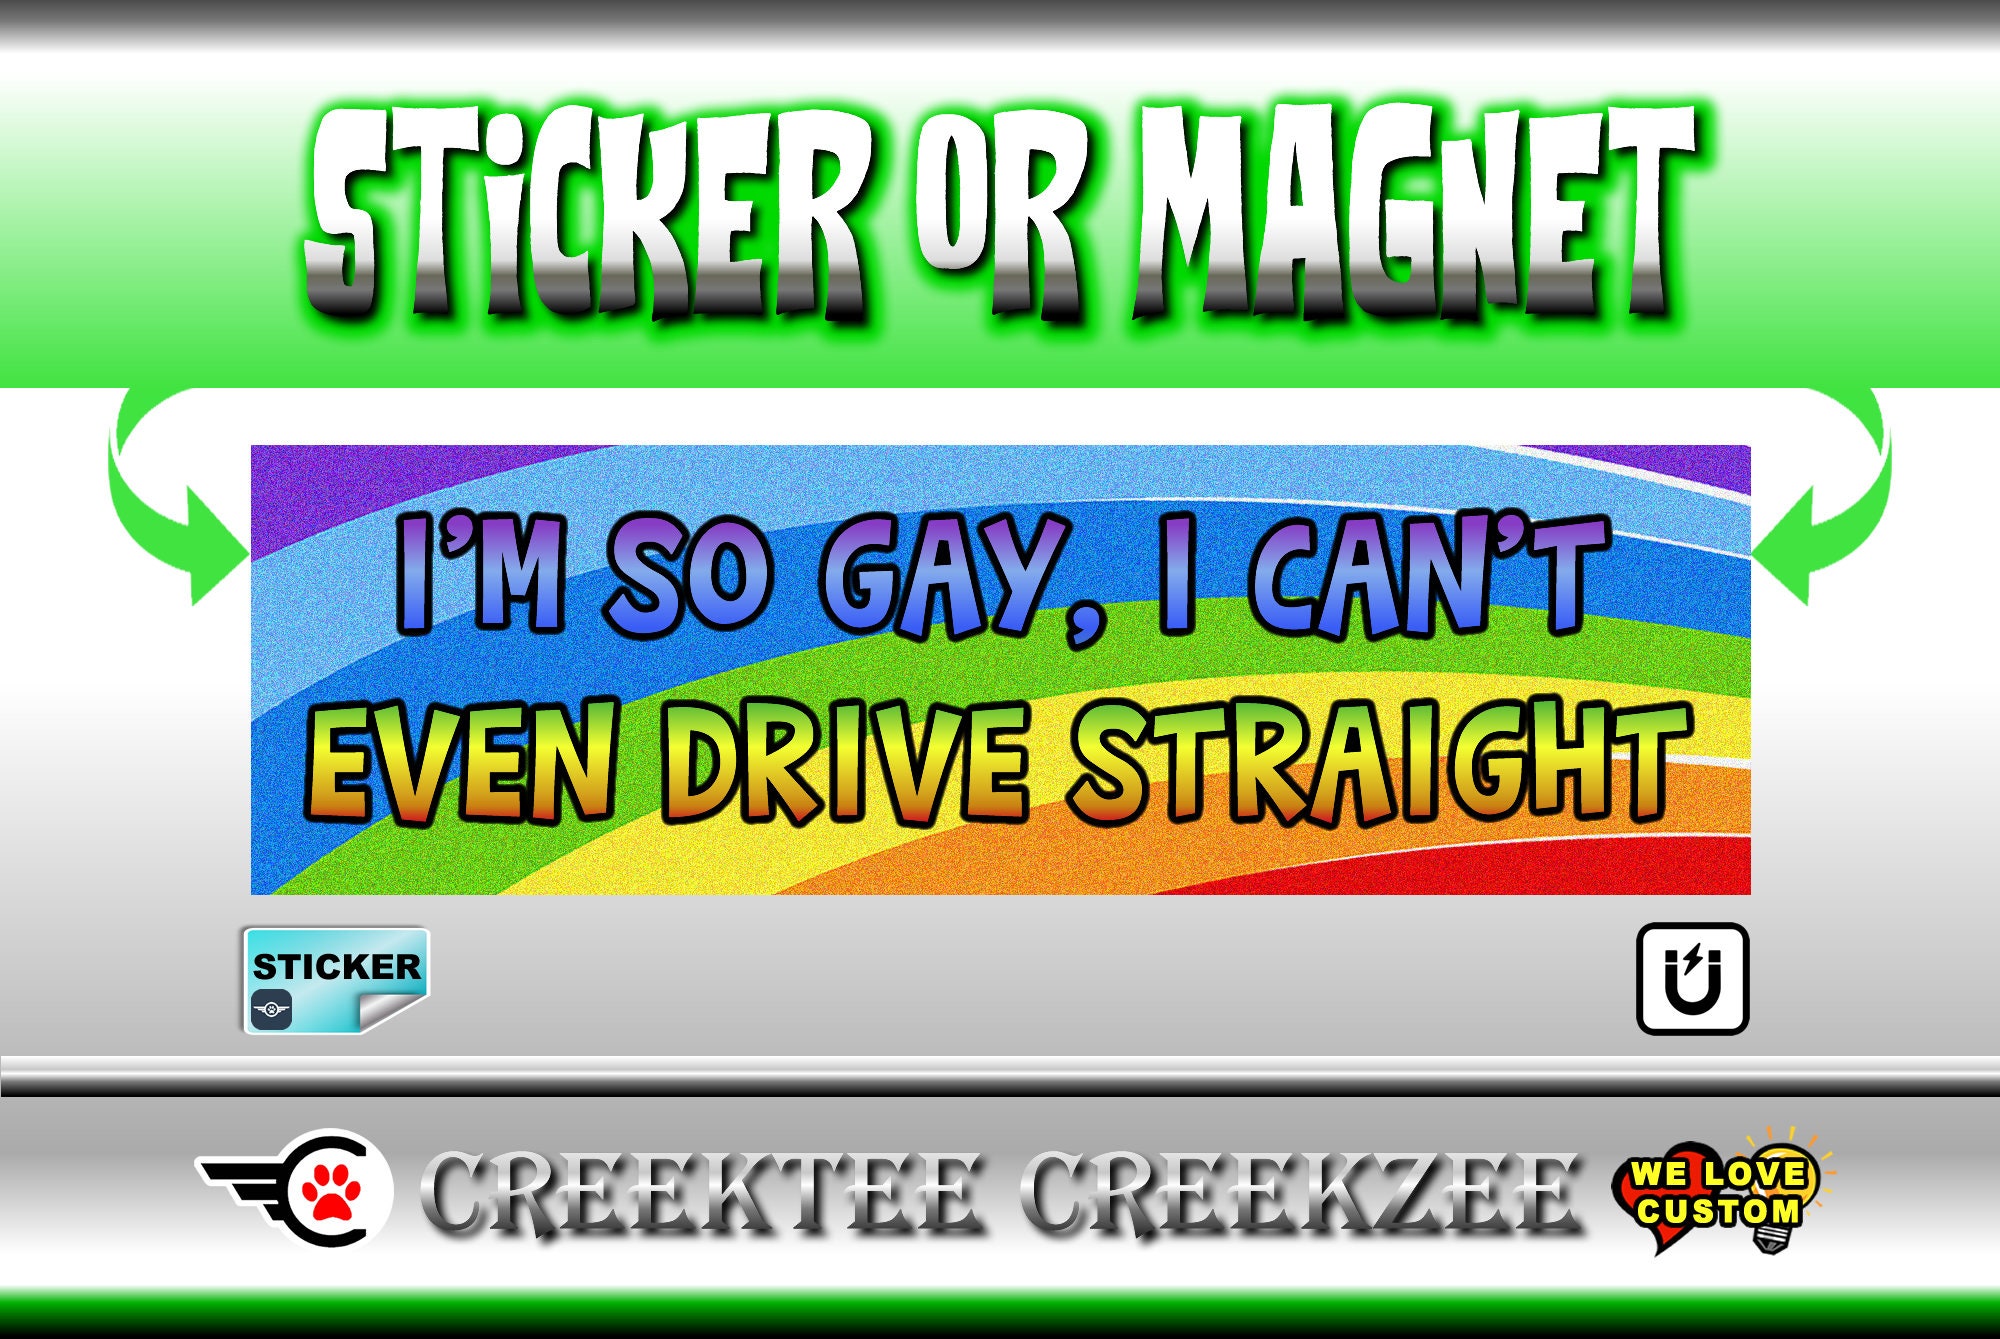 I'm so gay, I can't even drive straight Bumper Sticker or Magnet sizes 4